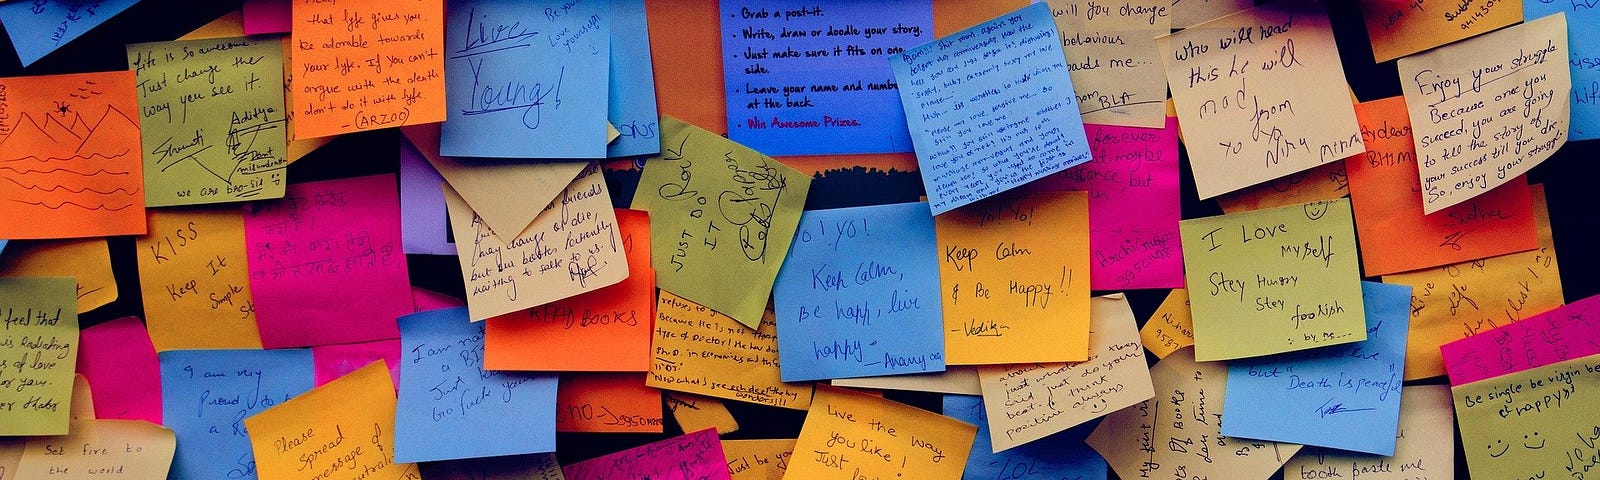 A haphazard collection of post-it notes on a wall.